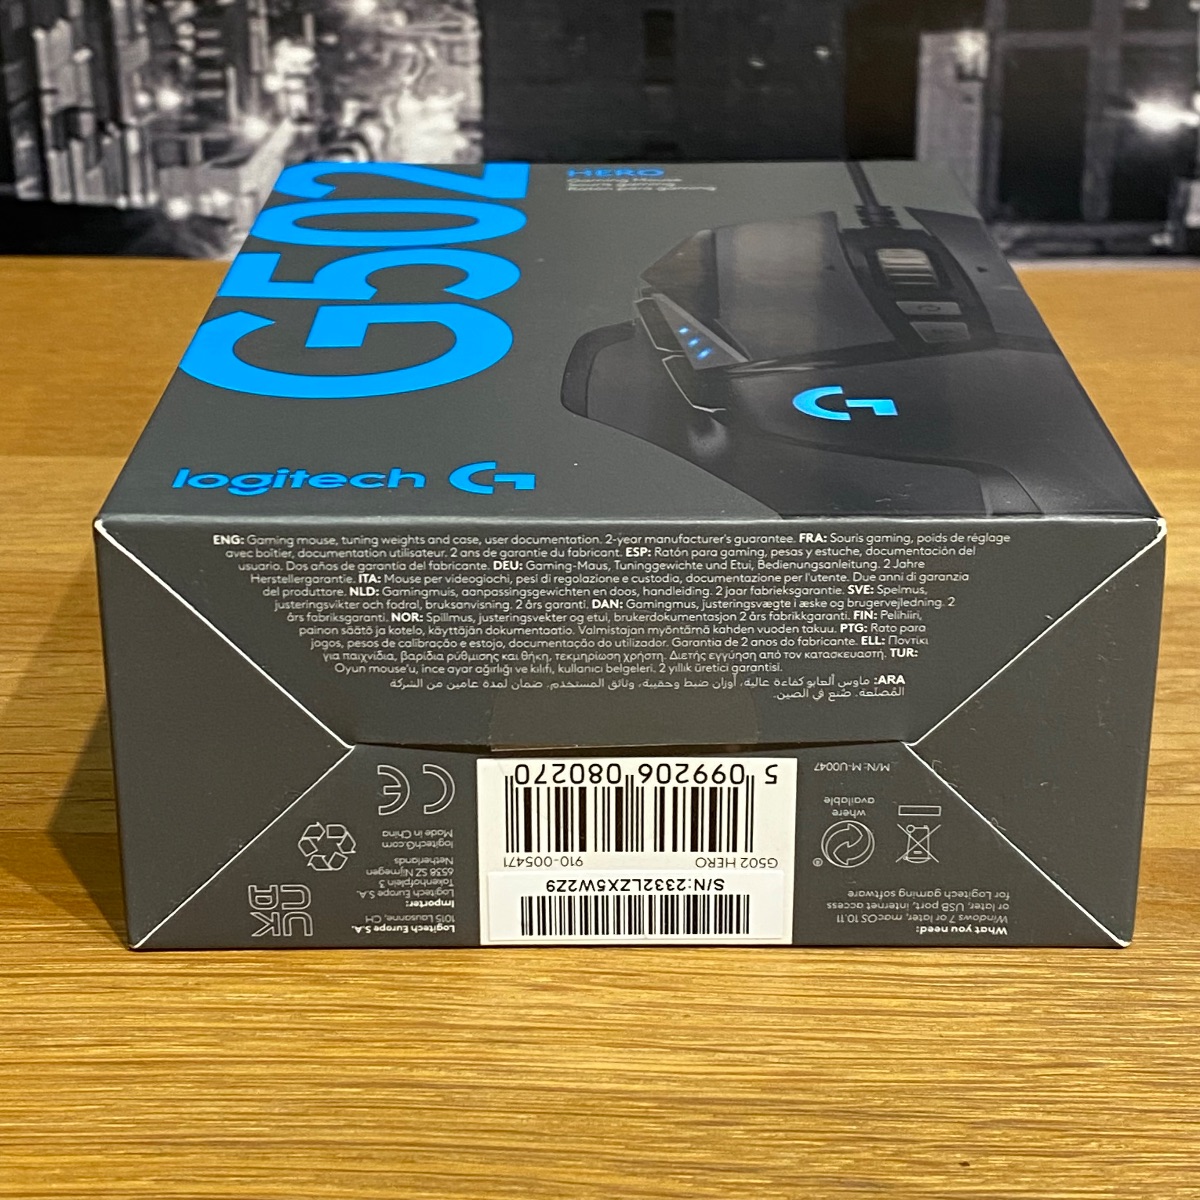 Logitech G502 Hero High Performance Wired Gaming Mouse - Black 100% Original 910004617 5099206080270 (Brand New)